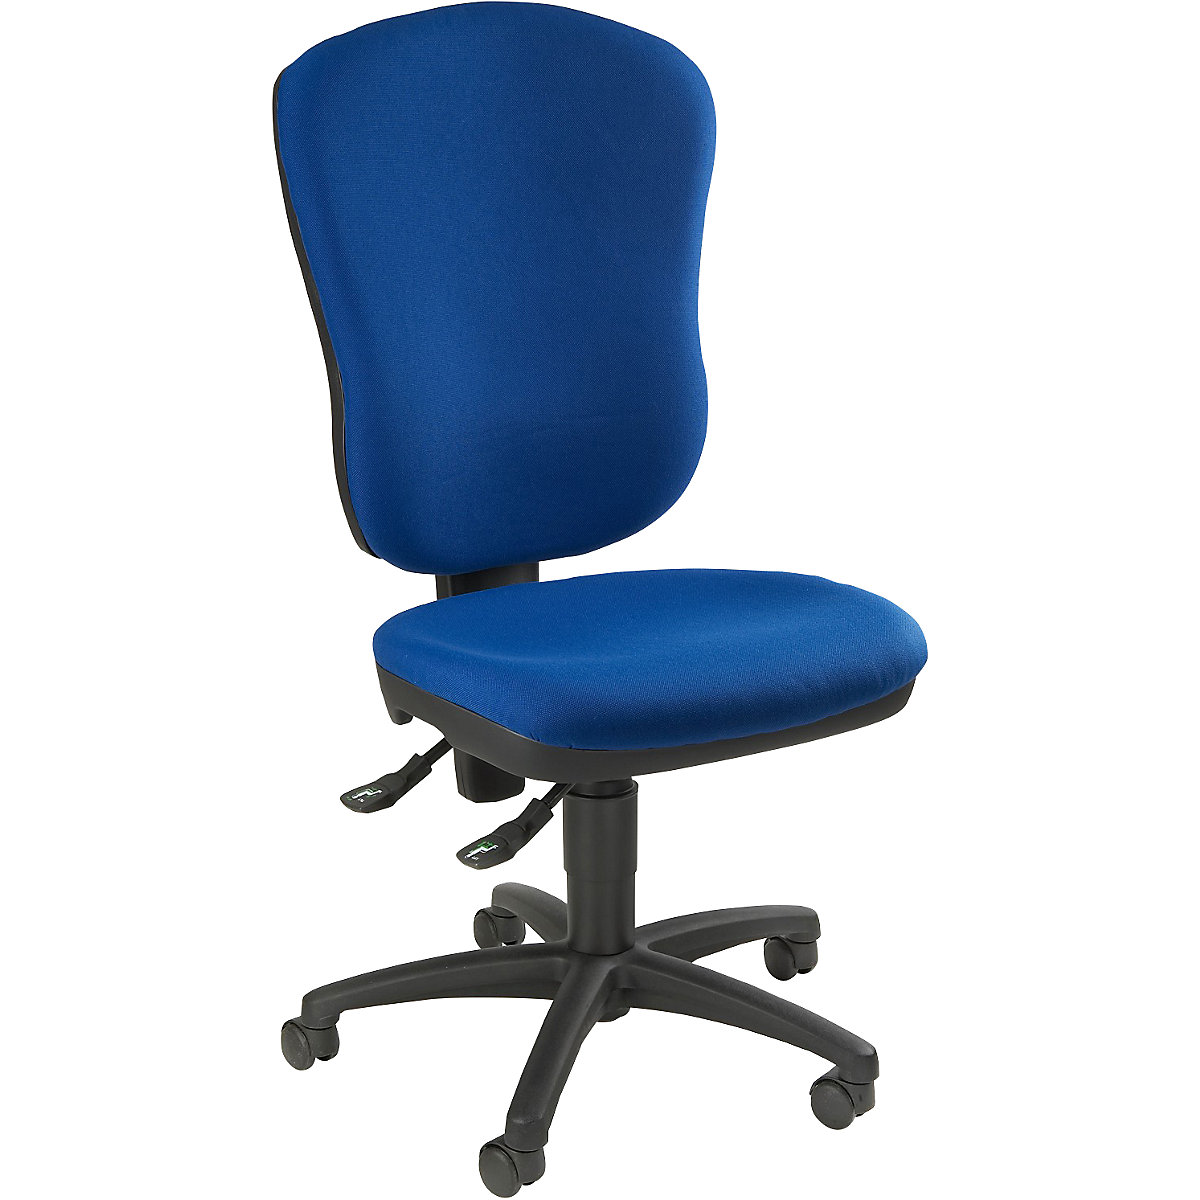 Standard swivel chair – Topstar, without arm rests, with lumbar support, back rest height 570 mm, royal blue cover, 3+ items-2